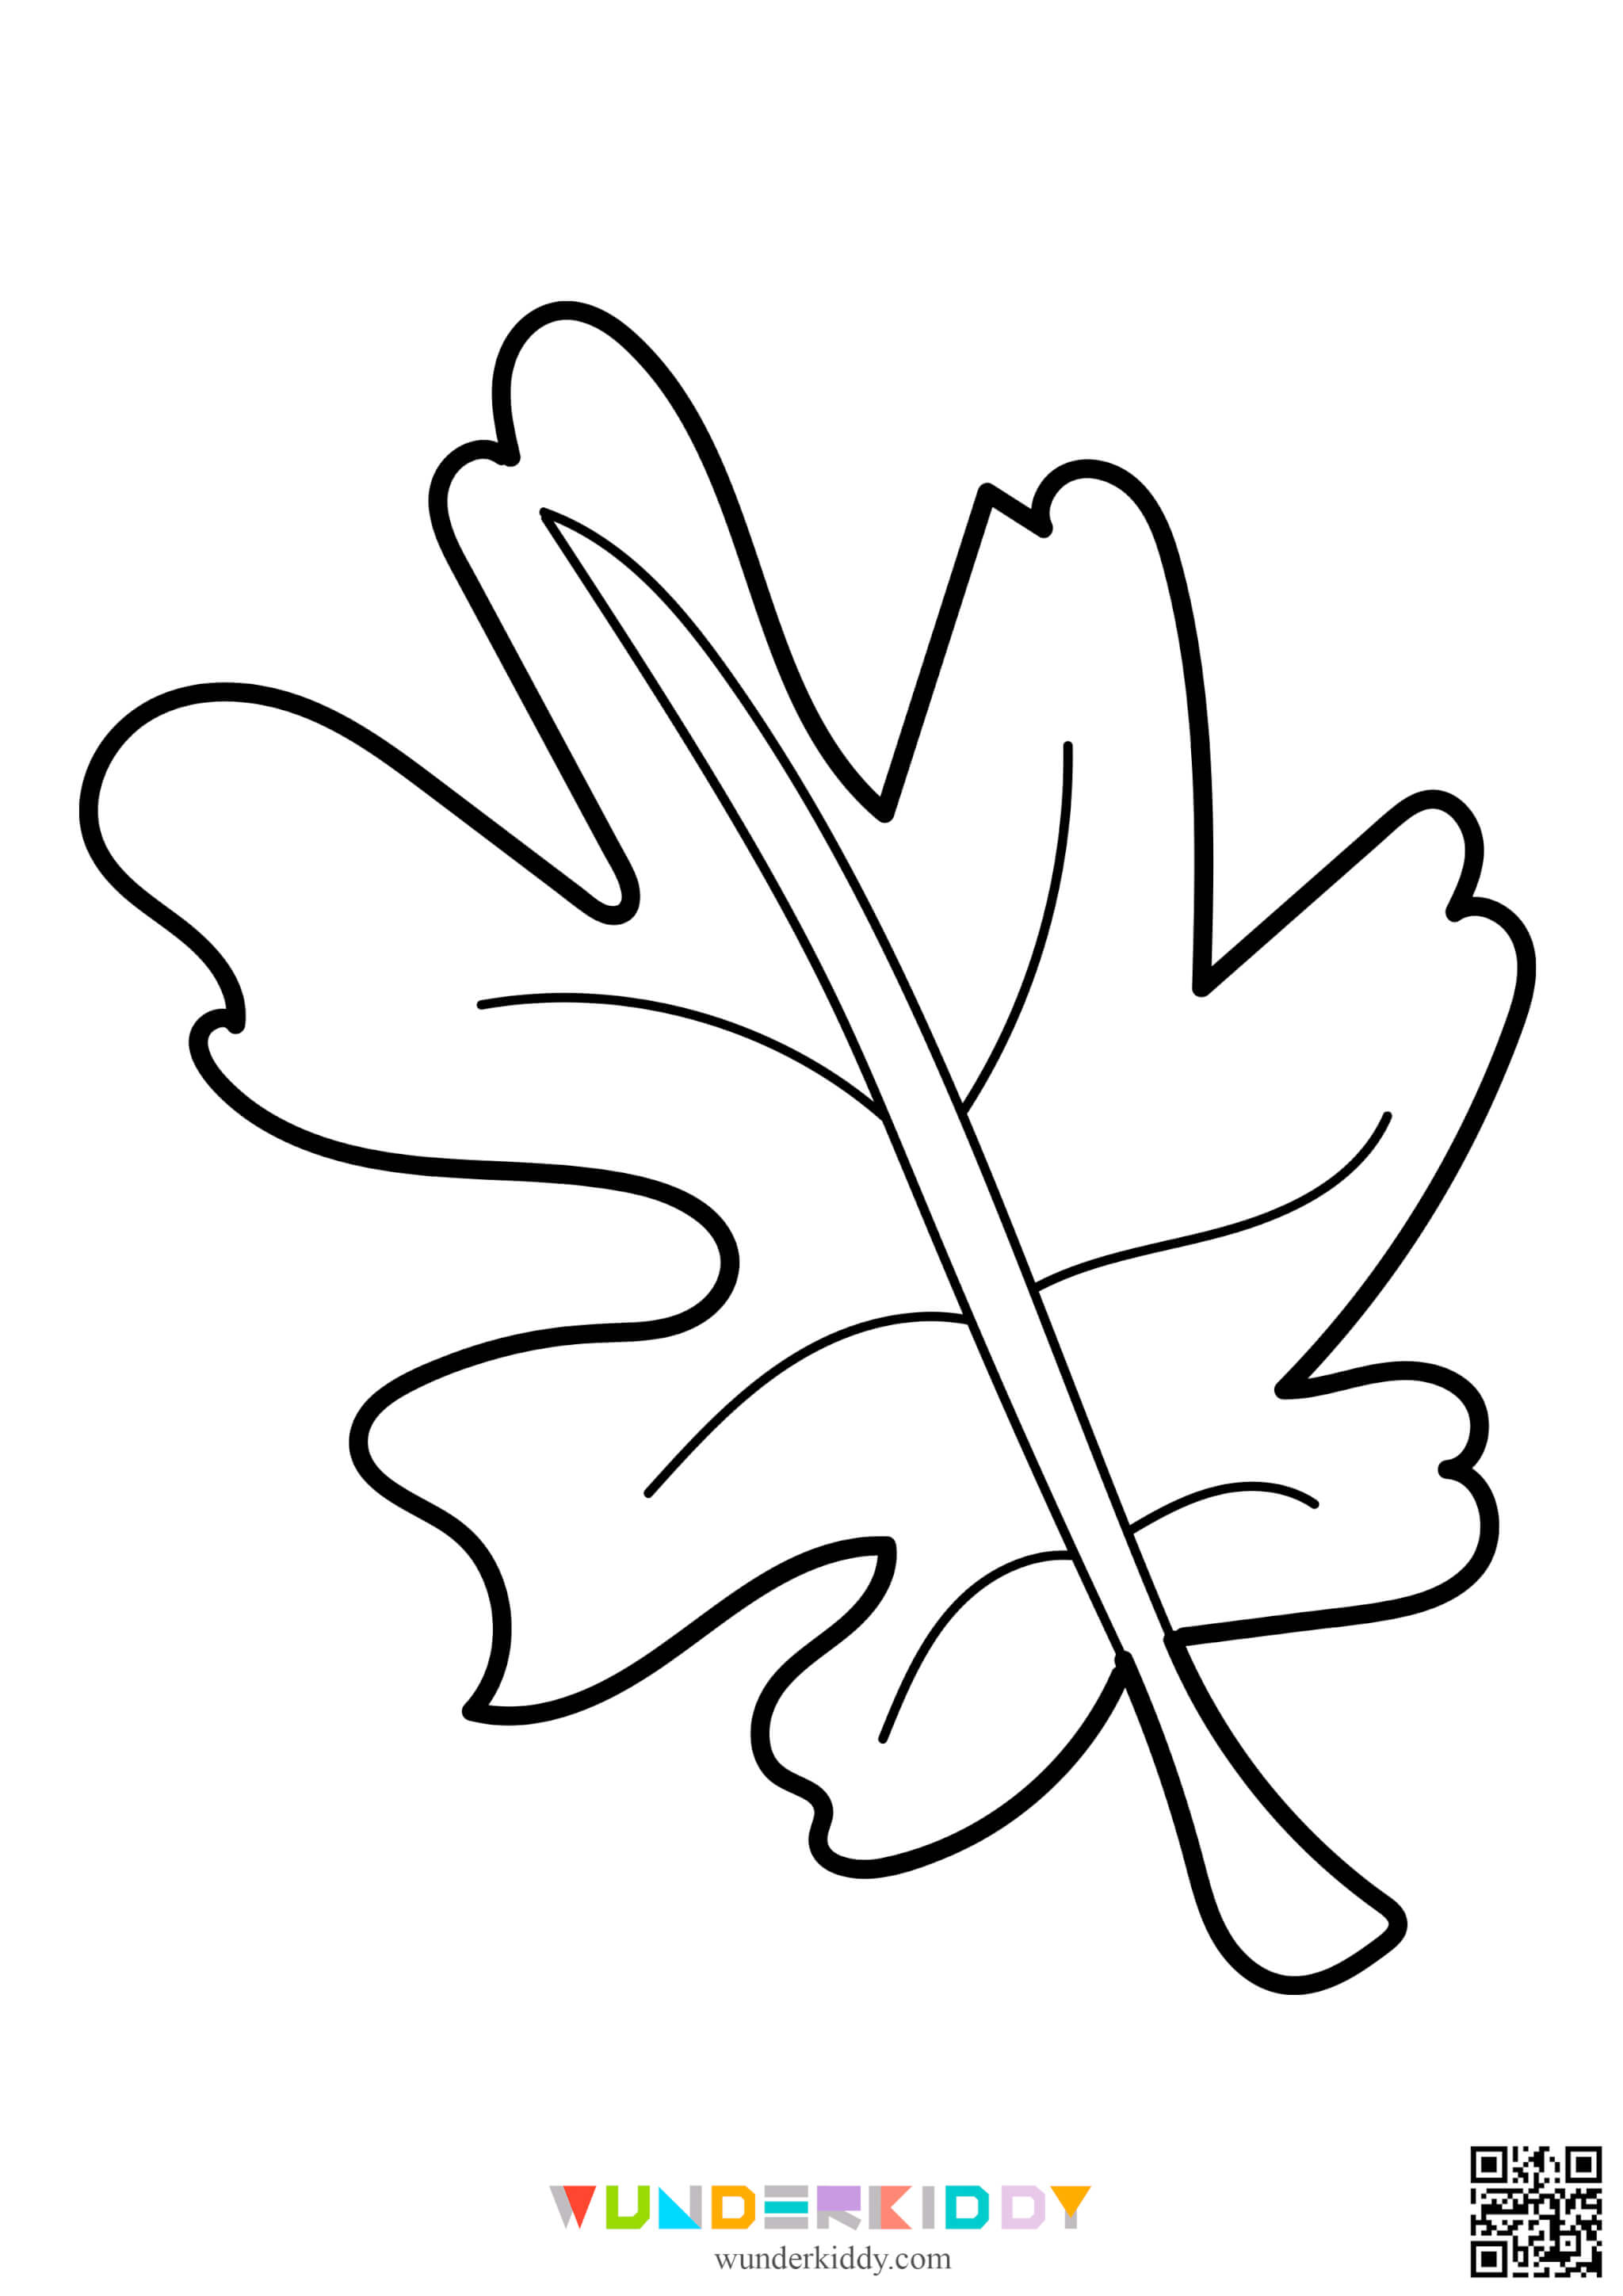 Fall Coloring Pages - Image 10